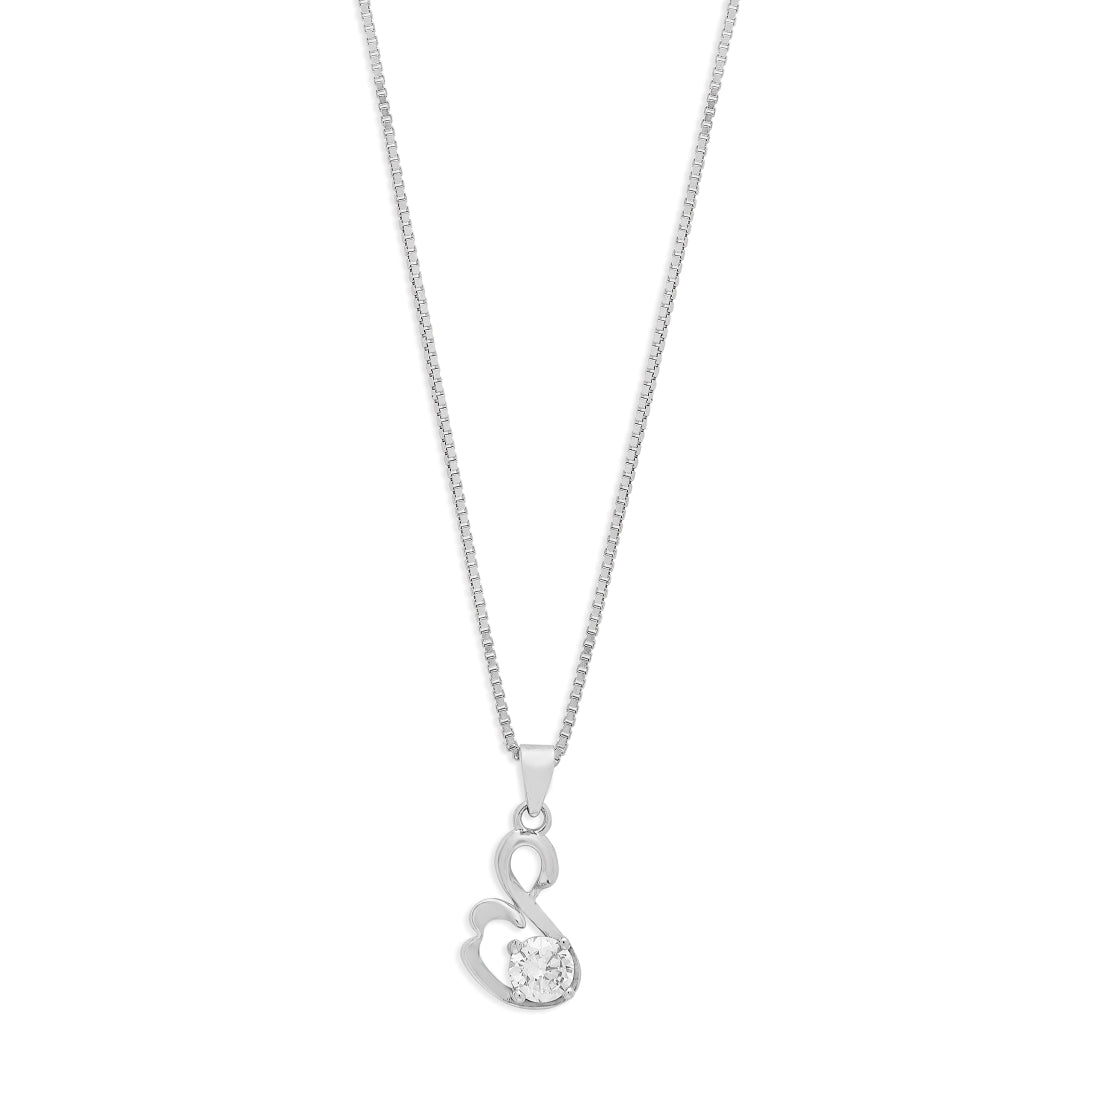 Enchanted Cubic Zirconia Rhodium Plated 925 Sterling Silver Pendant with Chain